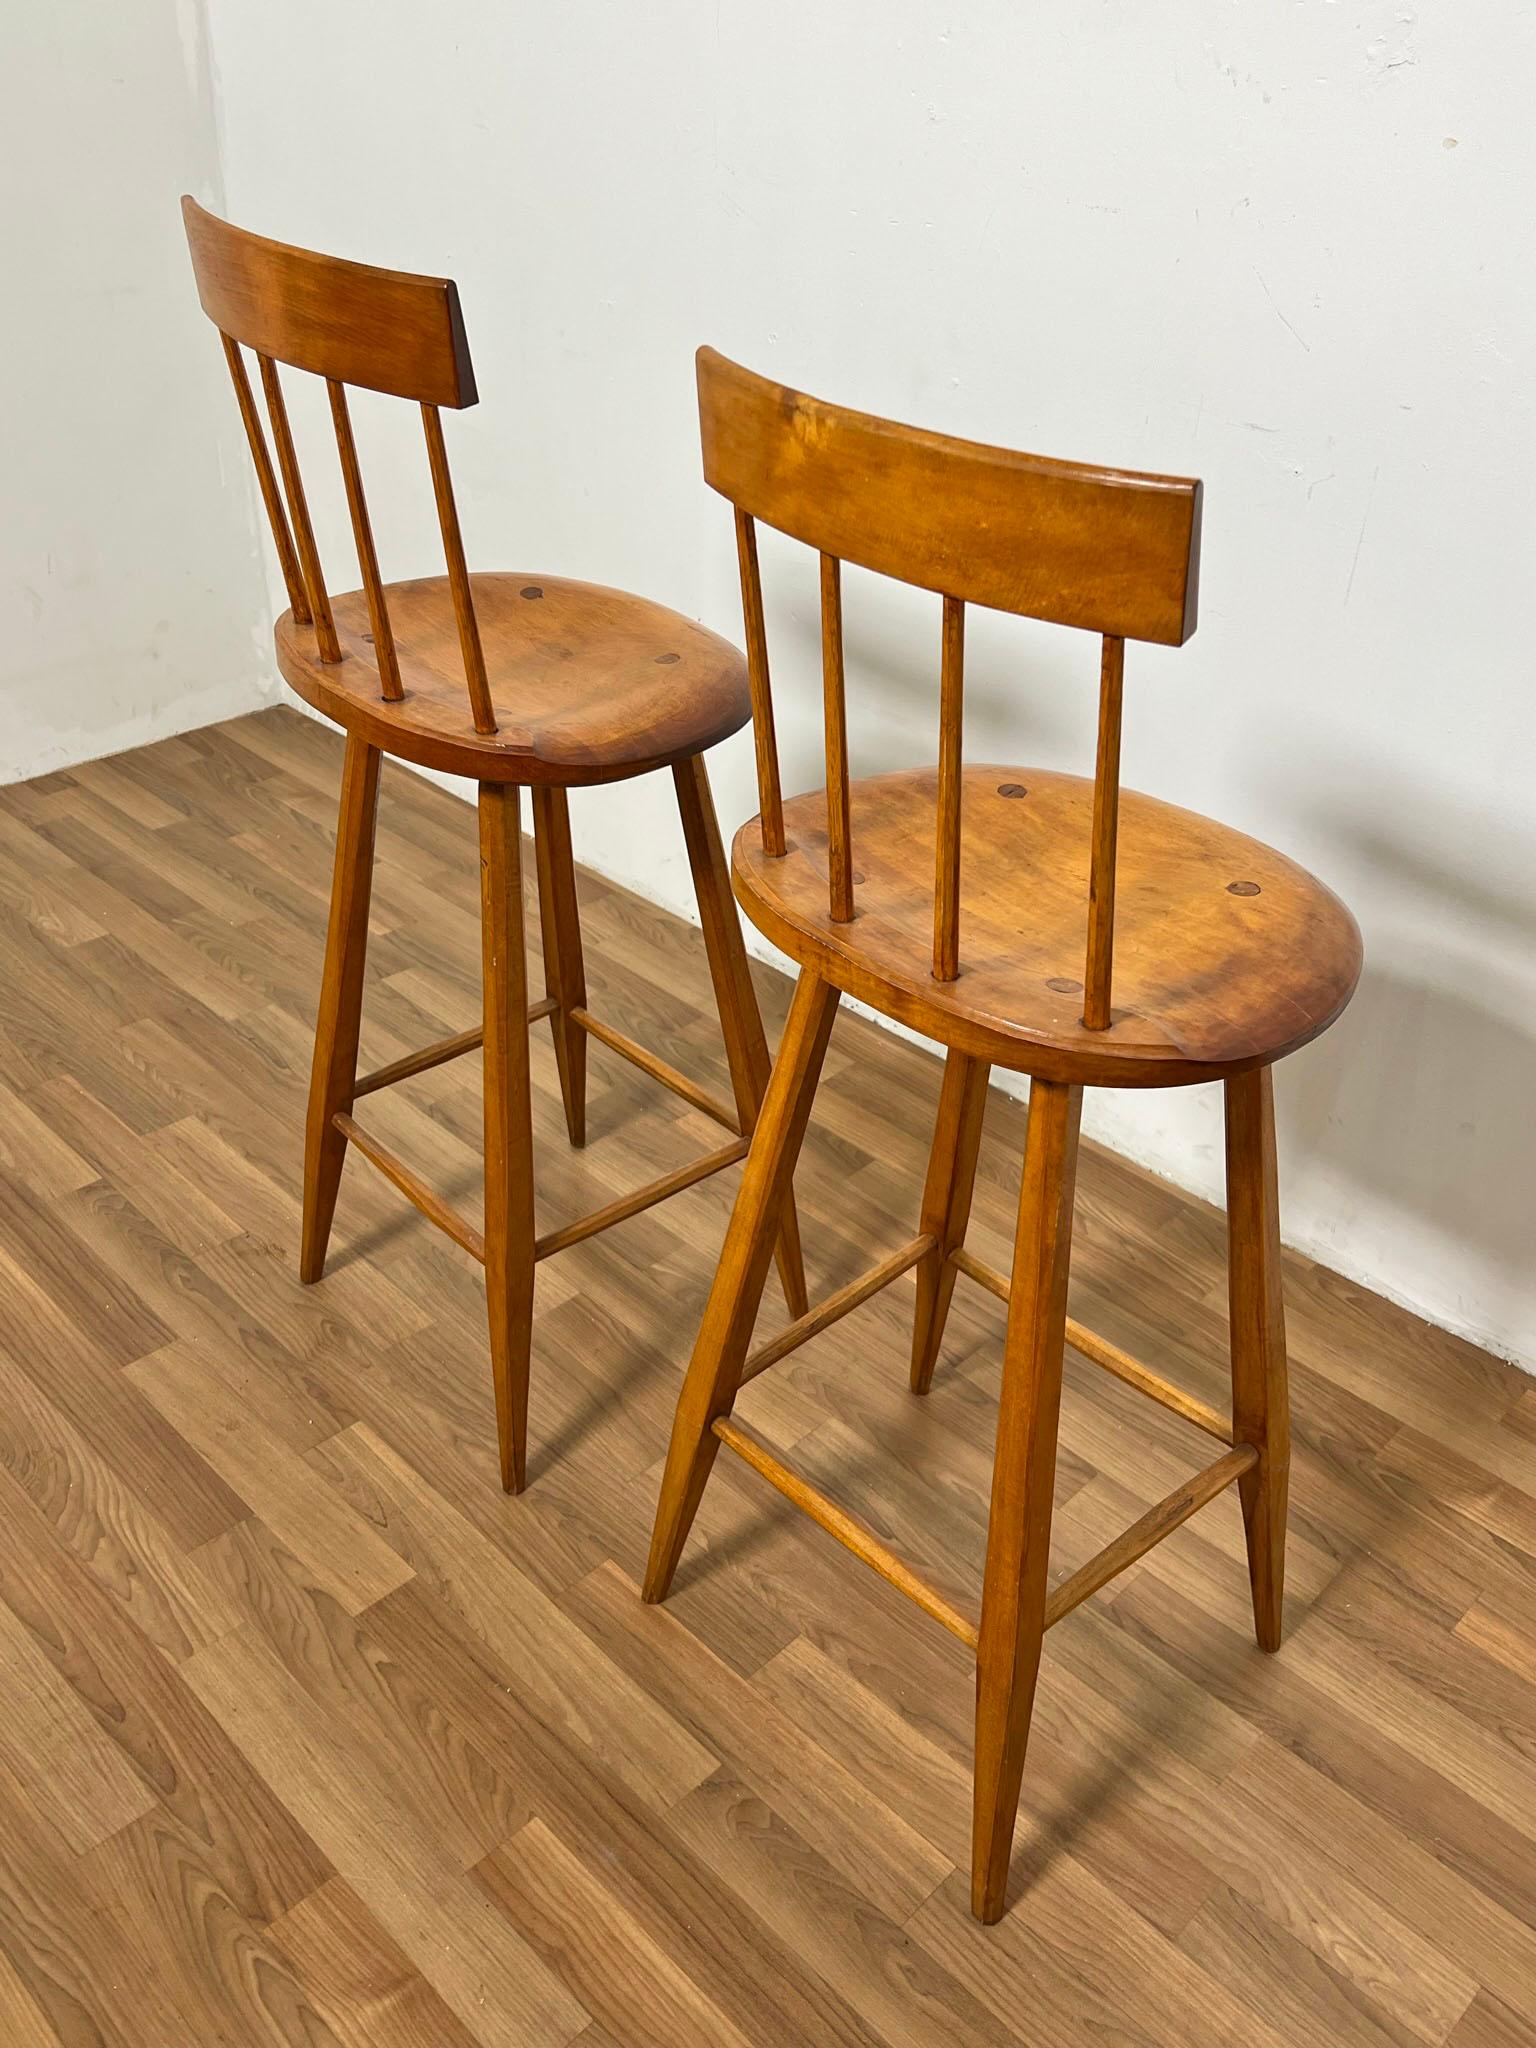 Pair of Hand Made Studio Craft Bar Stools by Bill Woodhead, D. 1985 For Sale 3